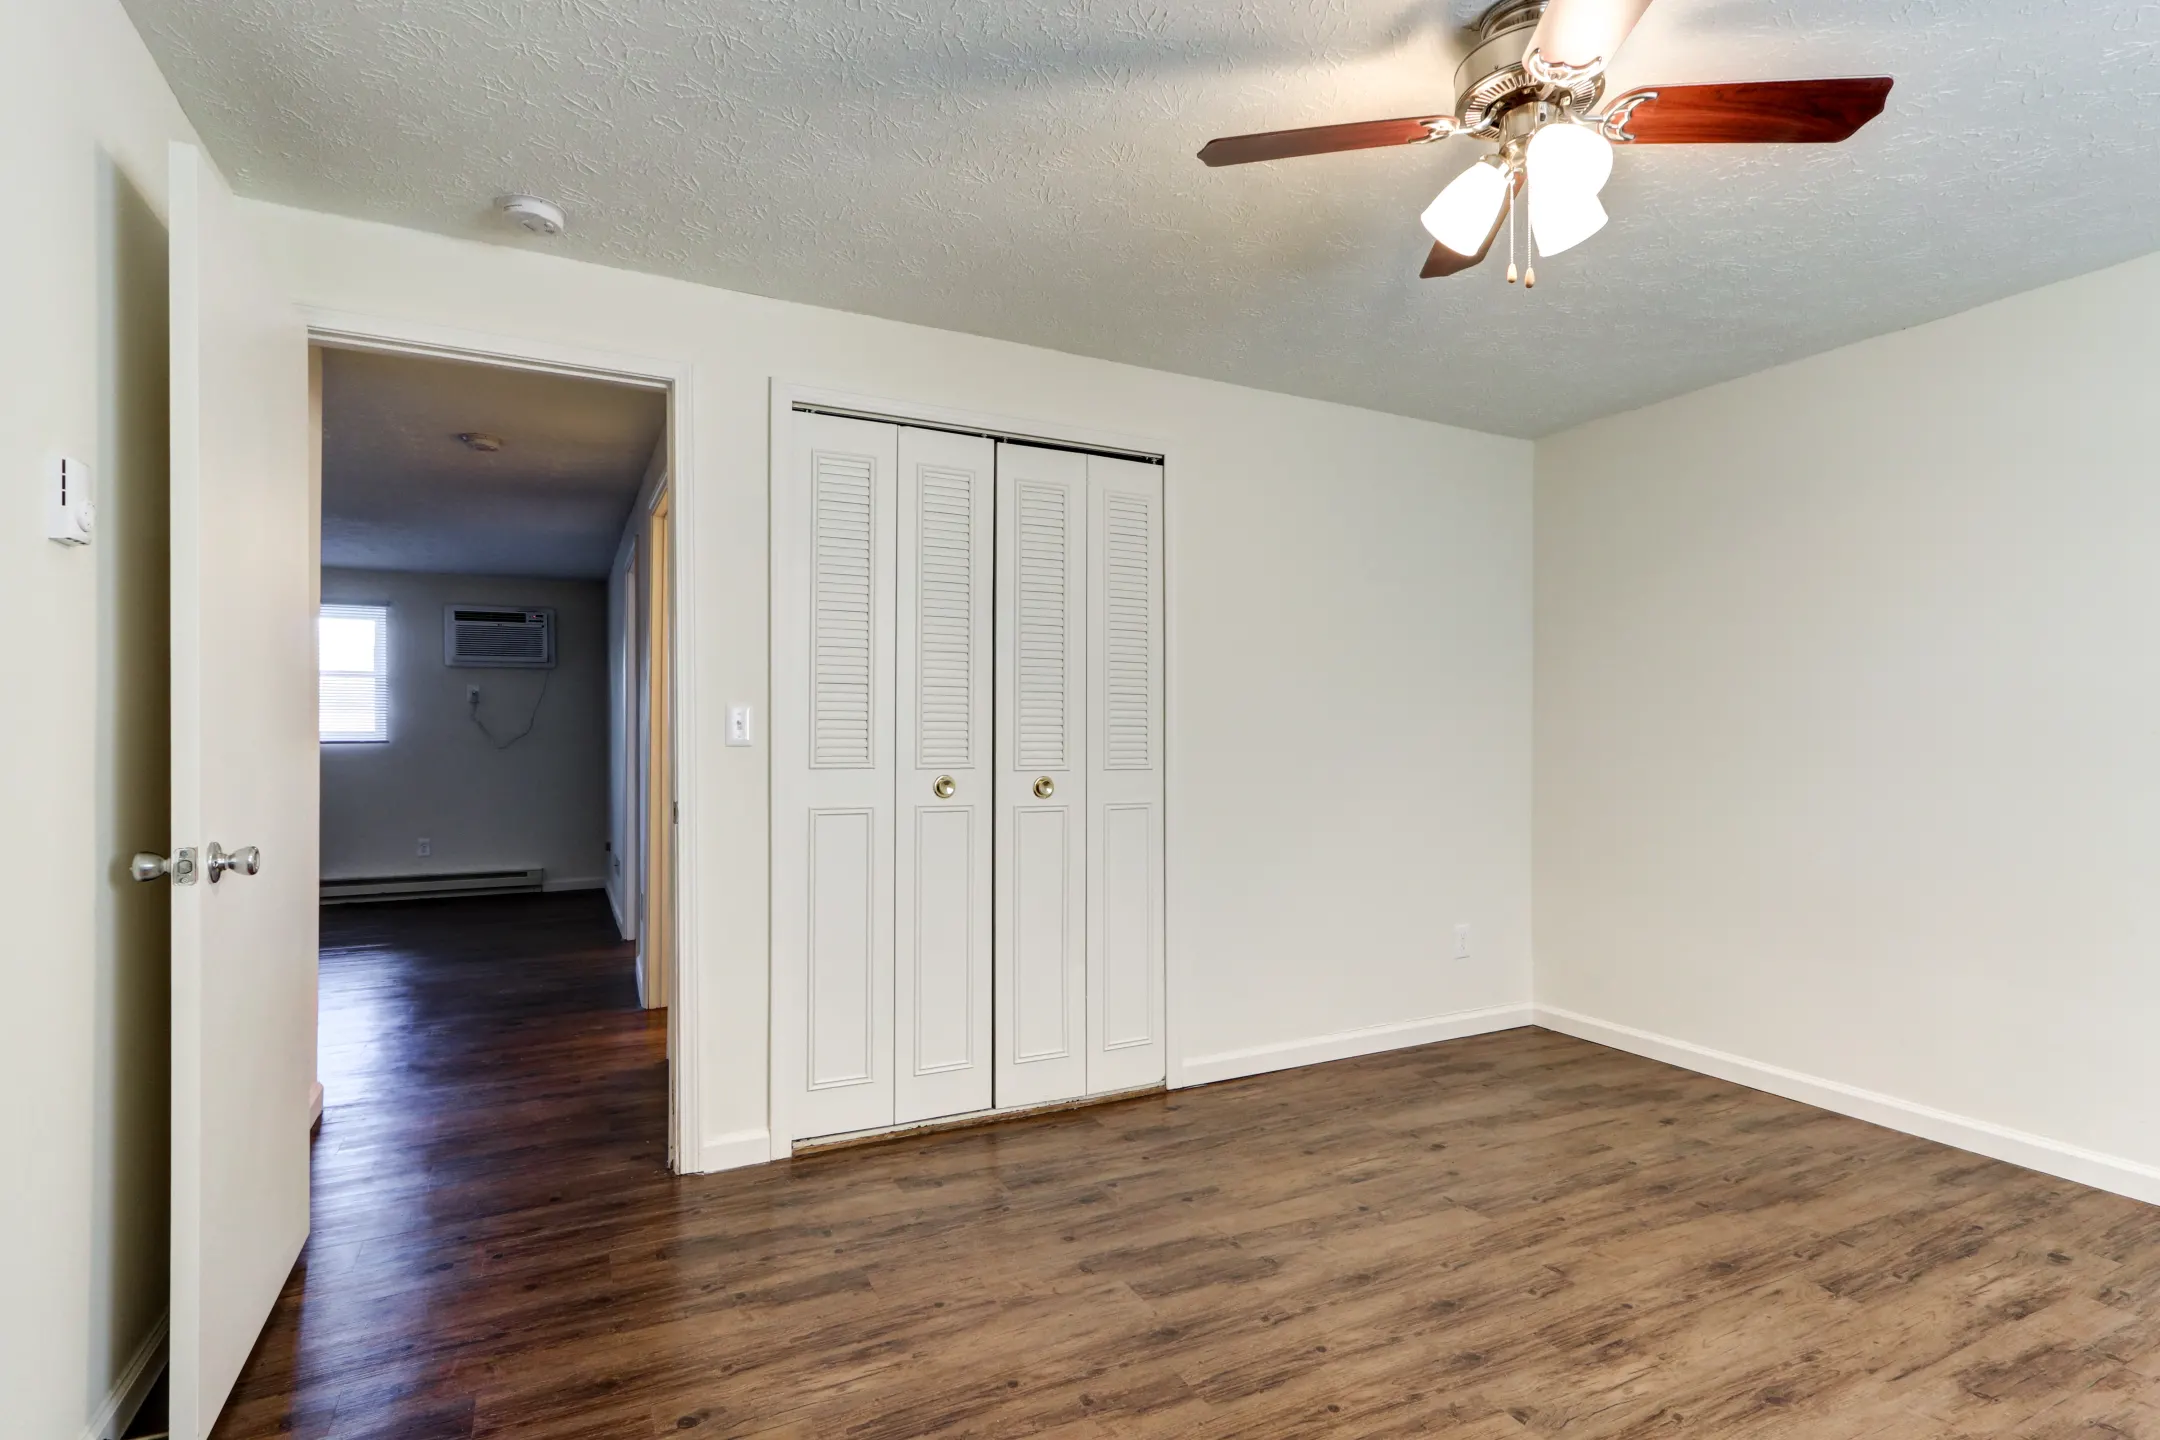 Lake Cable Village Apartments - 4784 South Blvd NW | Canton, OH ...